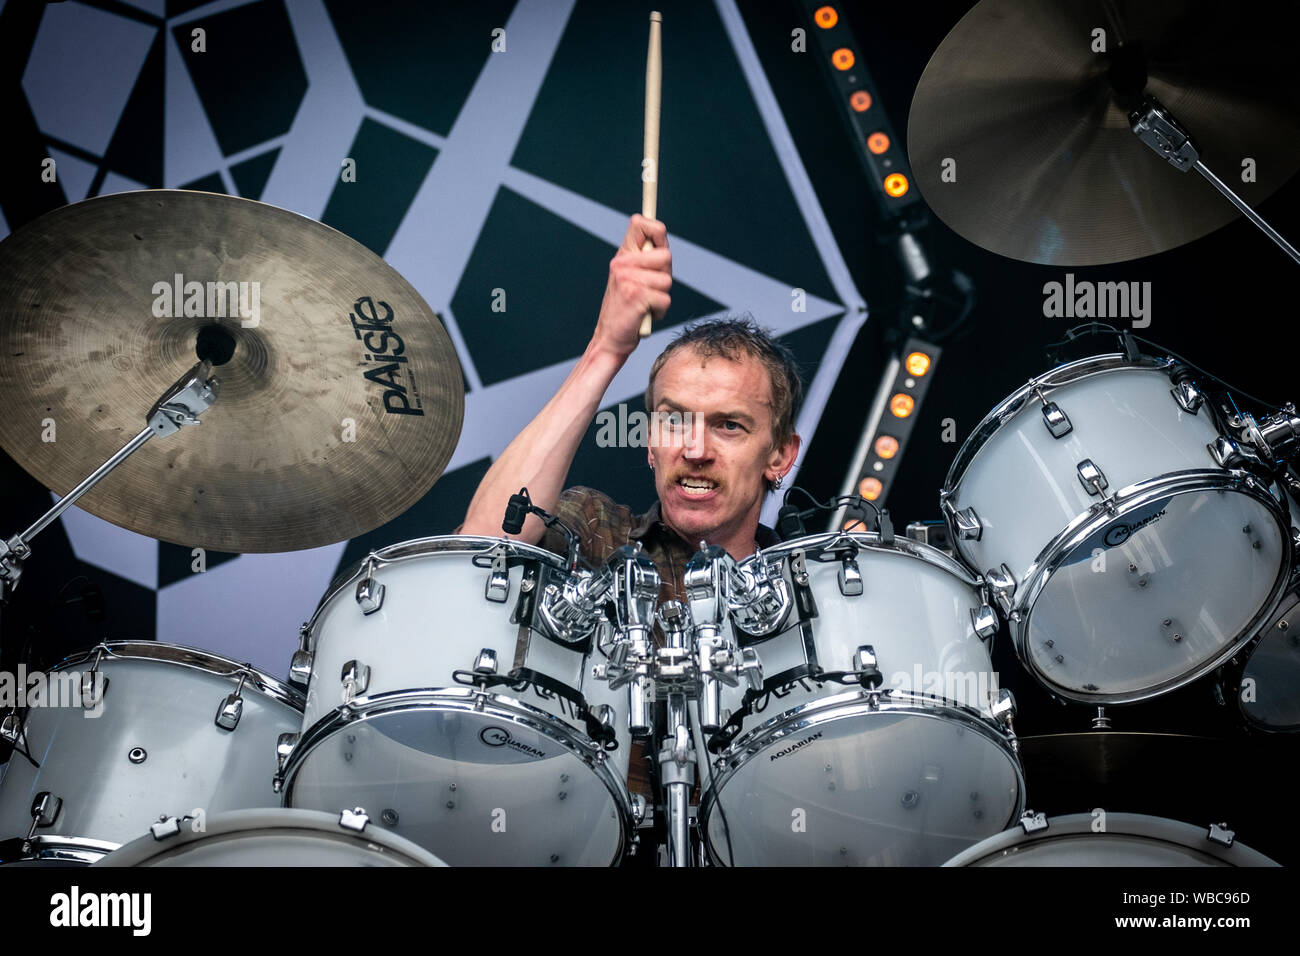 Trondheim, Norway. 3rd, June 2018. The Norwegian blues rock band Spidergawd performs a live concert during the Norwegian music festival Trondheim Rocks 2018 in Trondheim. Here drummer Kenneth Kapstad is seen live on stage. (Photo credit: Gonzales Photo - Tor Atle Kleven). Stock Photo